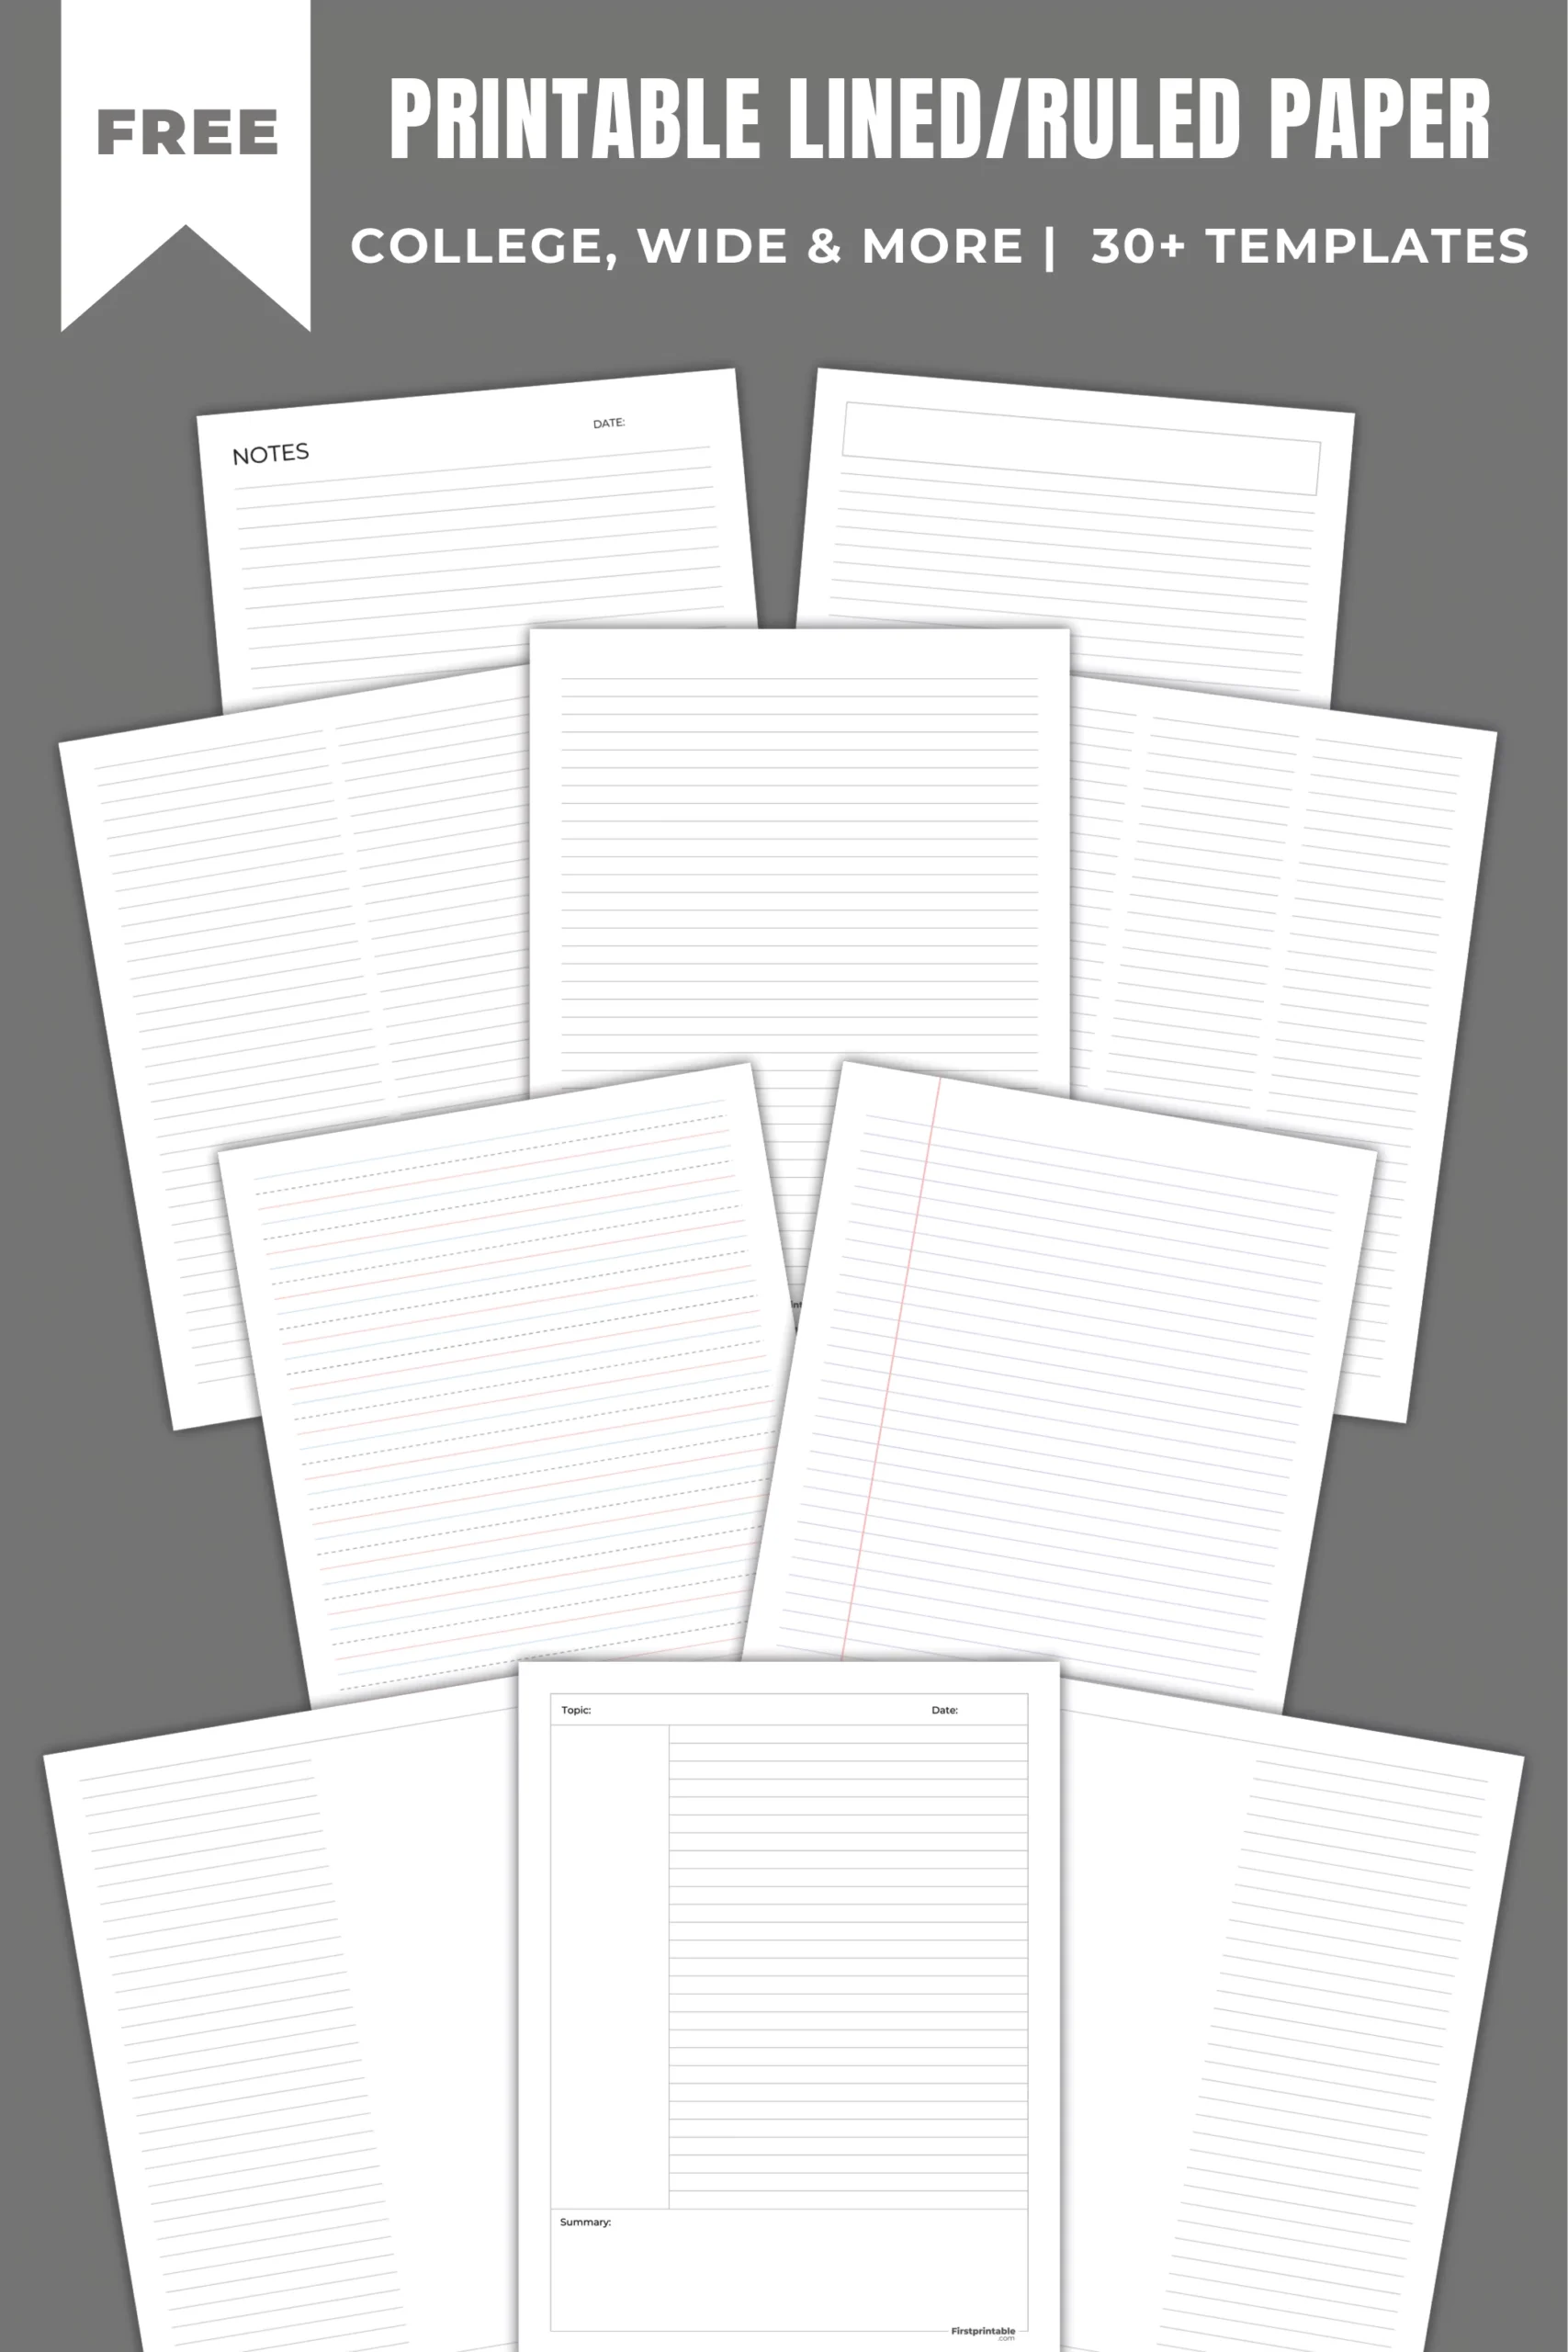 Click here for Printable Lined Paper